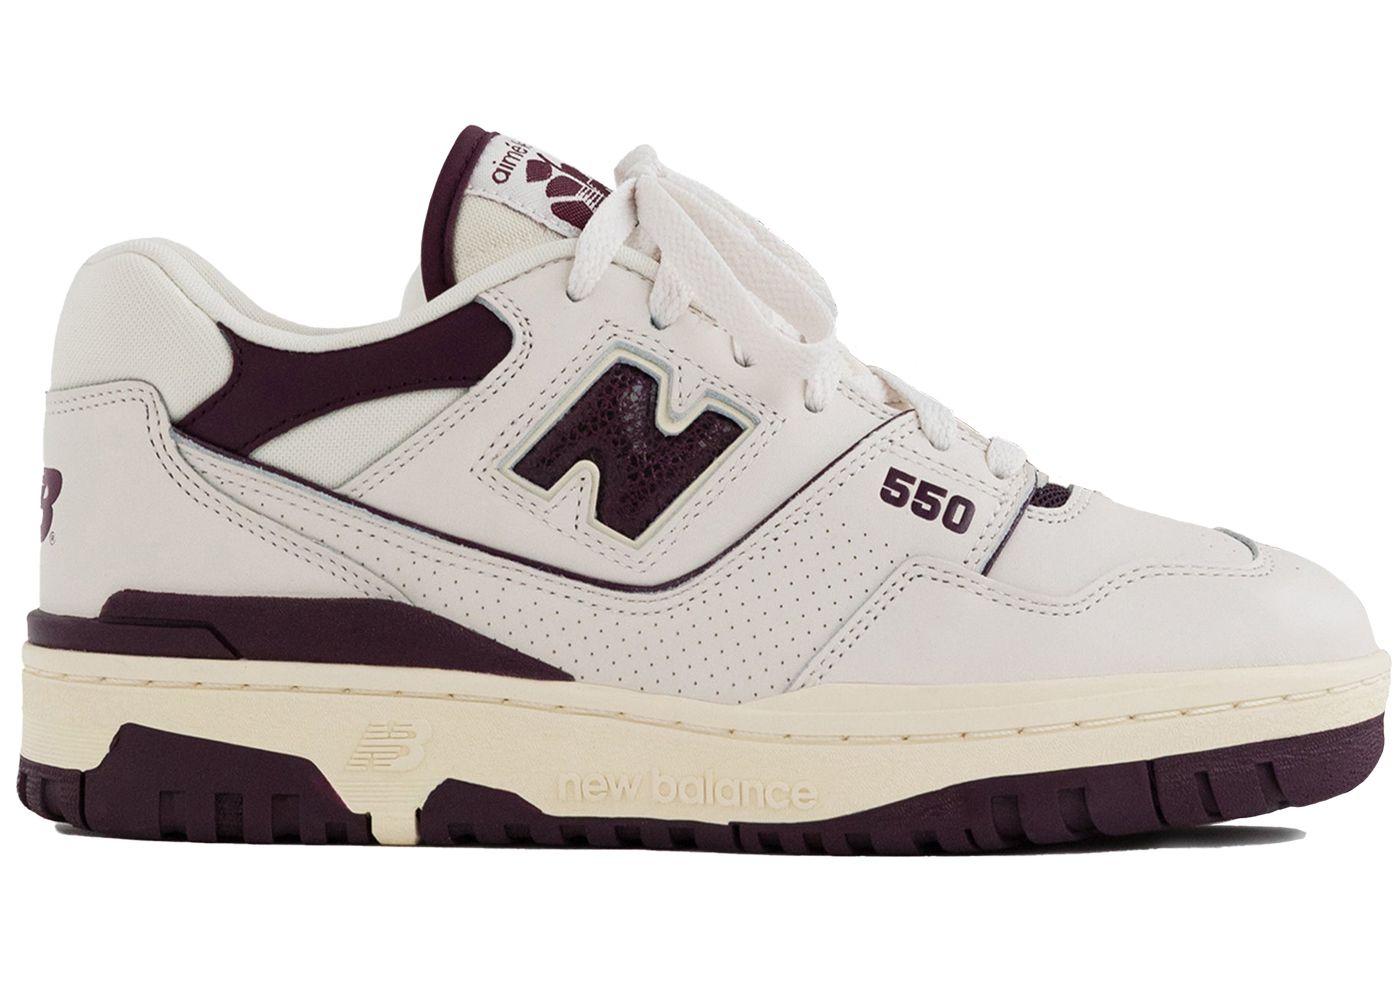 New Balance Shoes - Release Date